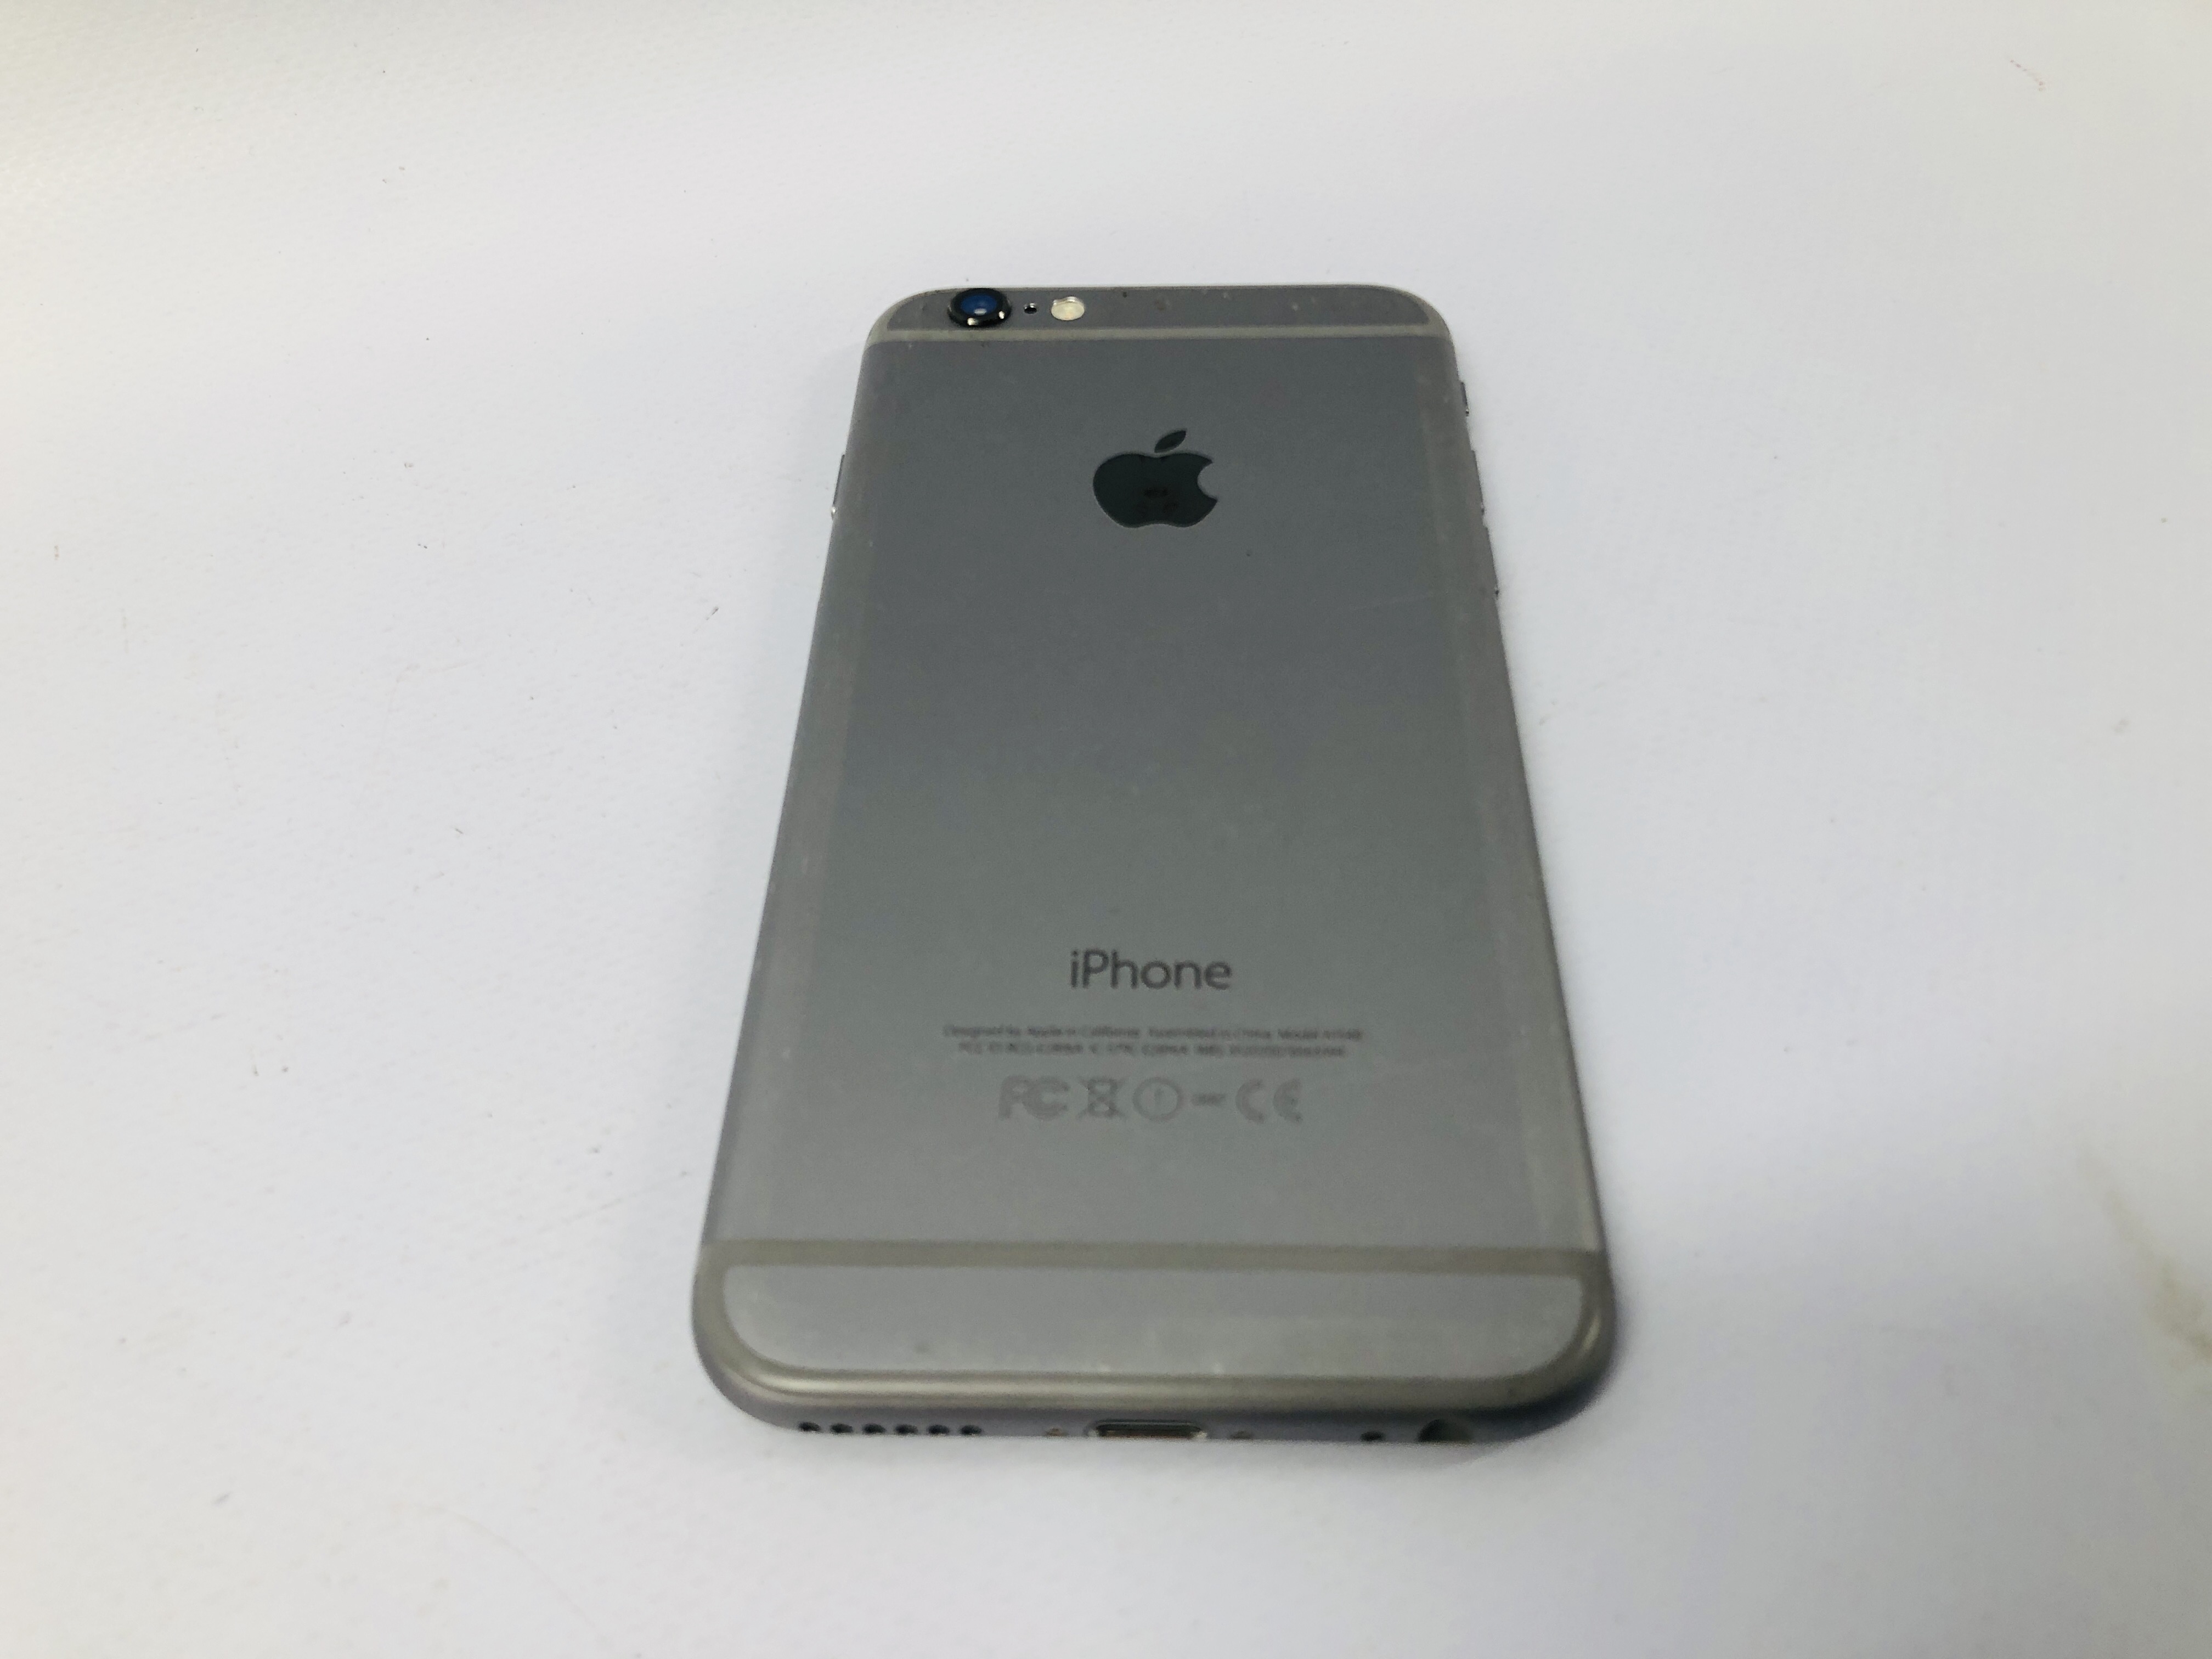 APPLE IPHONE 6 32GB - NO GUARANTEE OF CONNECTIVITY. SOLD AS SEEN. - Image 5 of 6